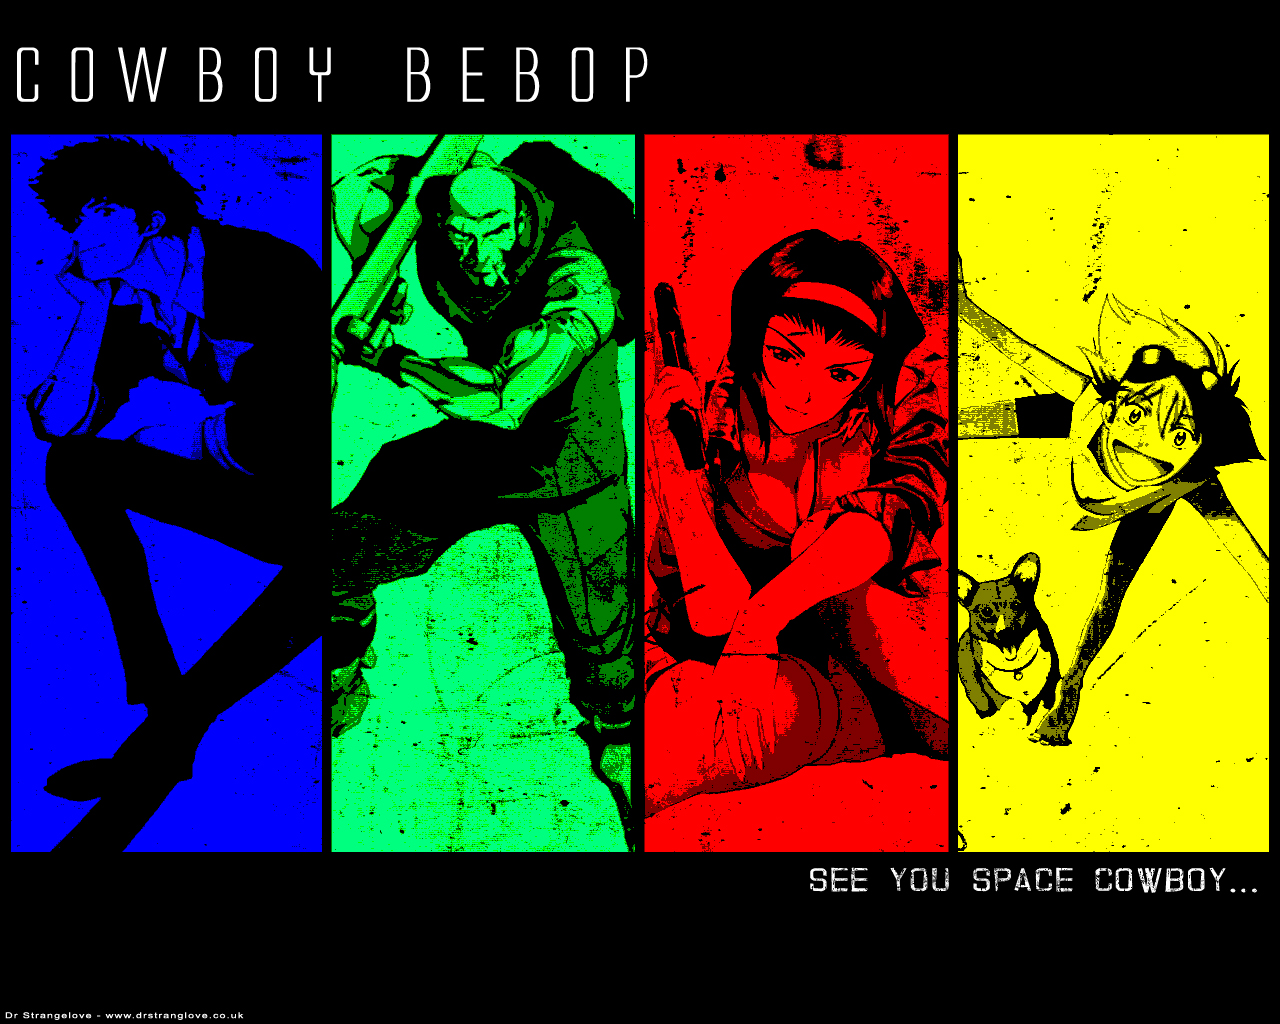 Cowboy Bebop: an anime set in the future, with a sort of sci-fi/western 